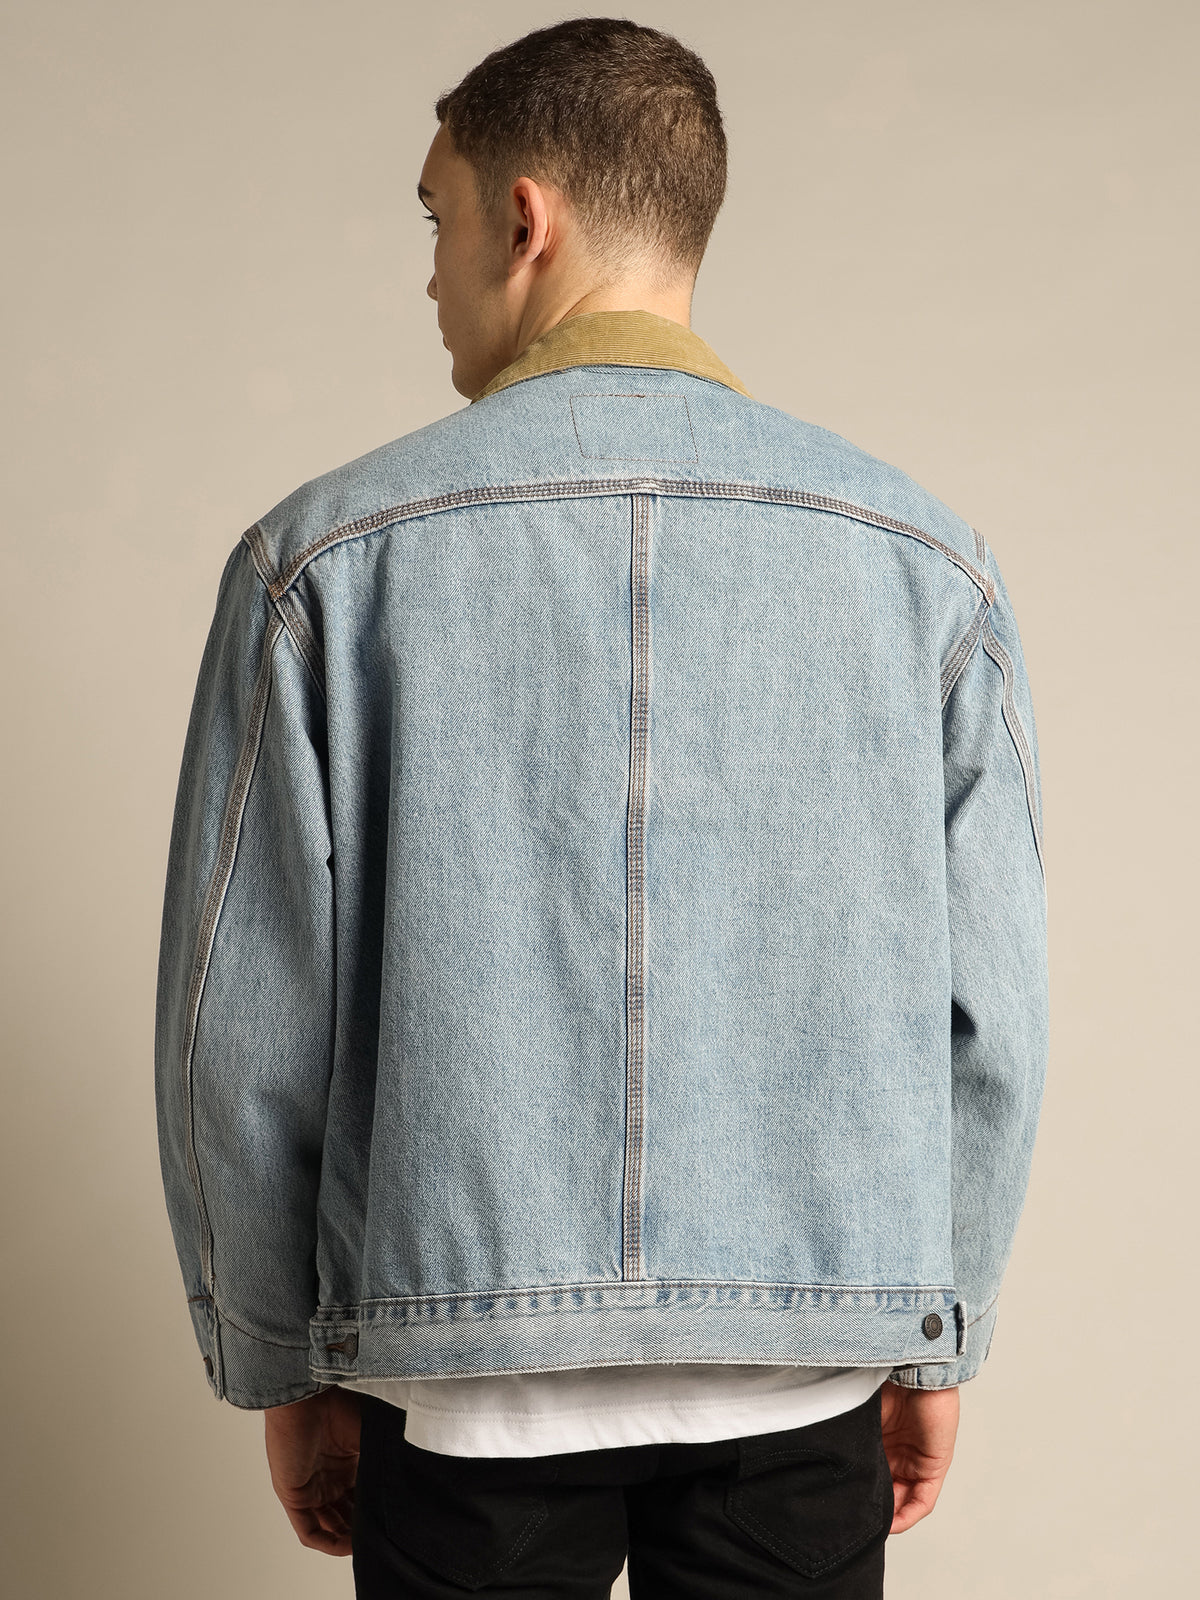 Sunset Trucker Jacket in How Strong